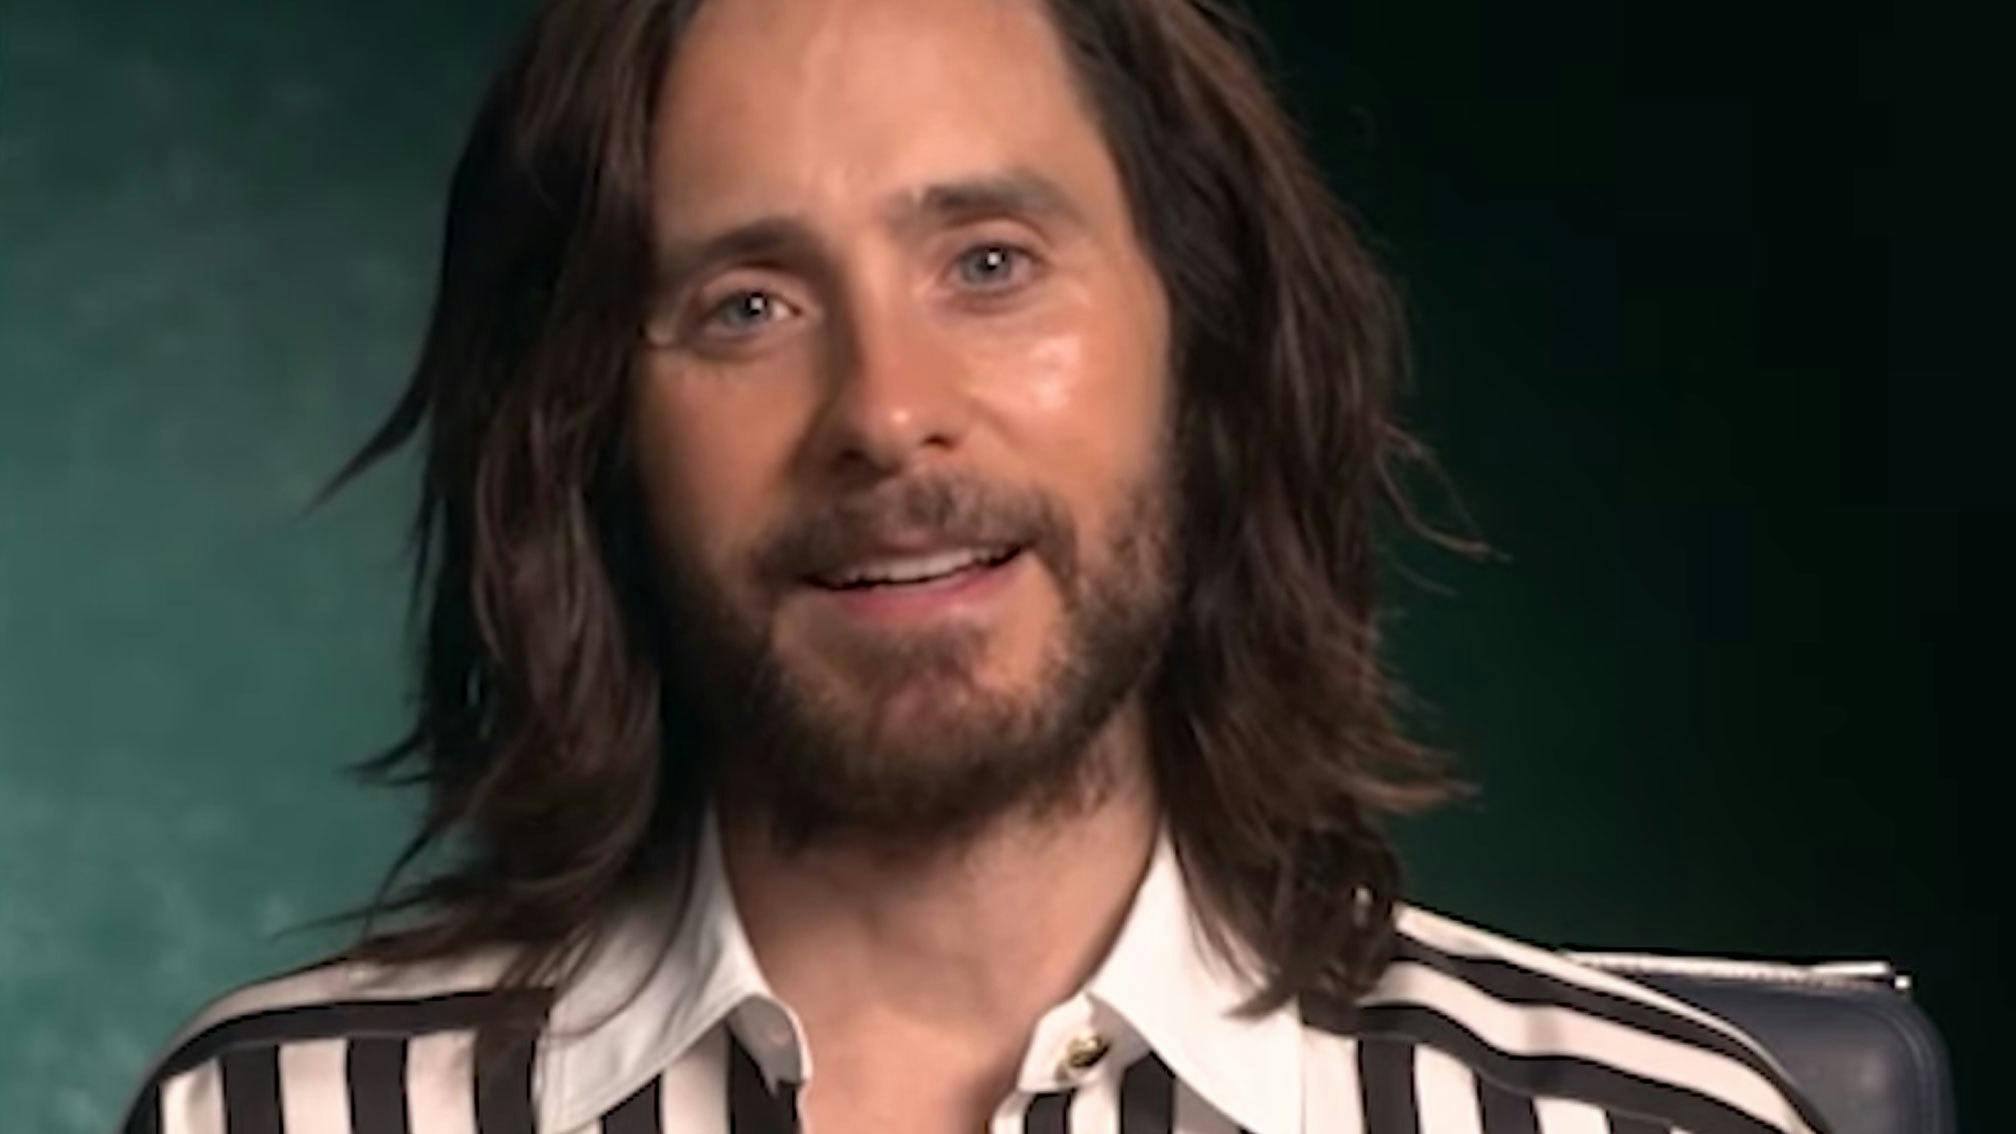 Jared Leto talks Thirty Seconds To Mars' new songs and "the right time" to release them